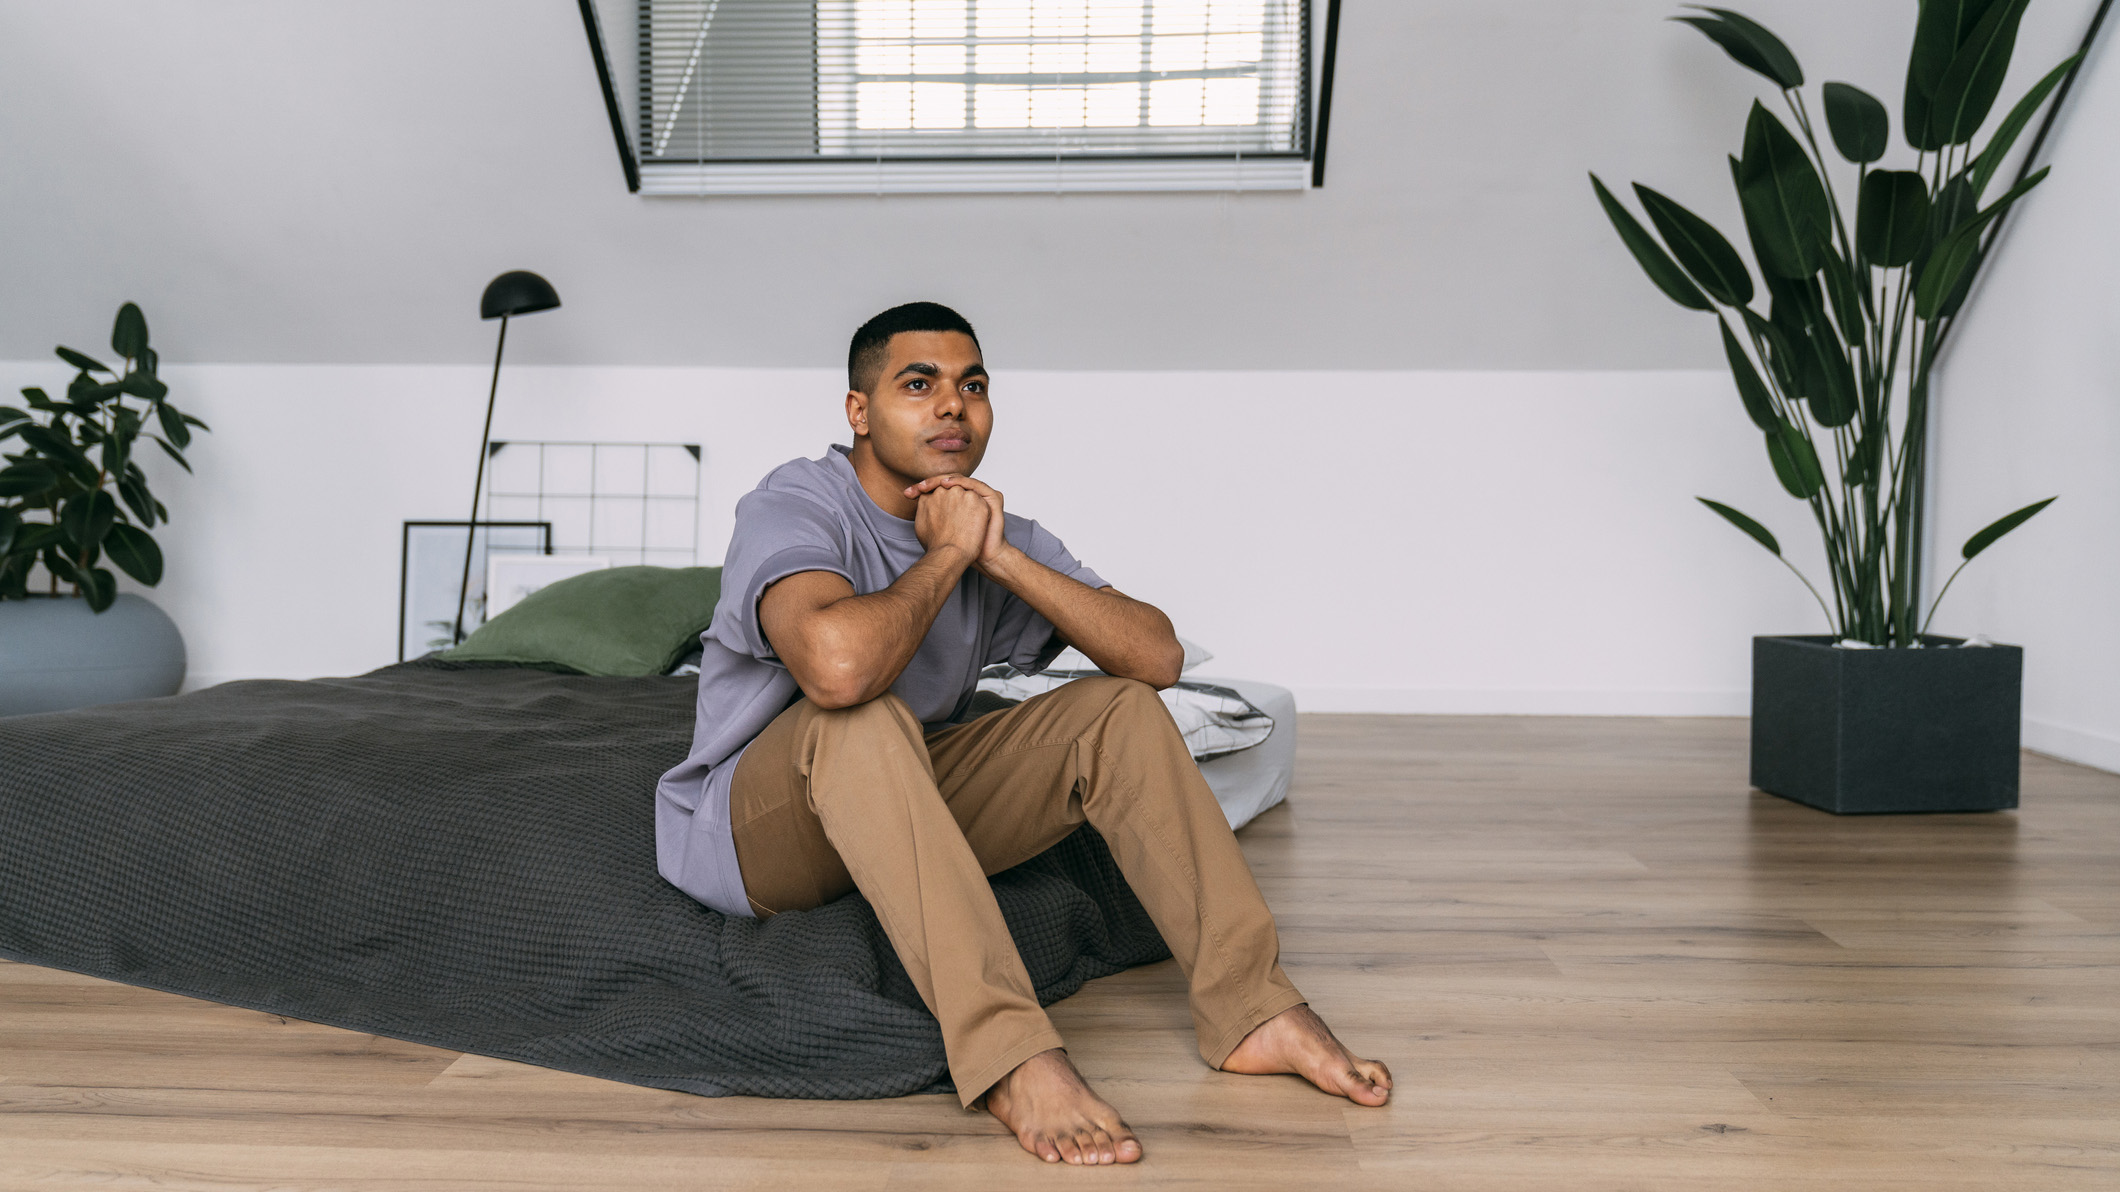 A man sits on a mattress on the floor